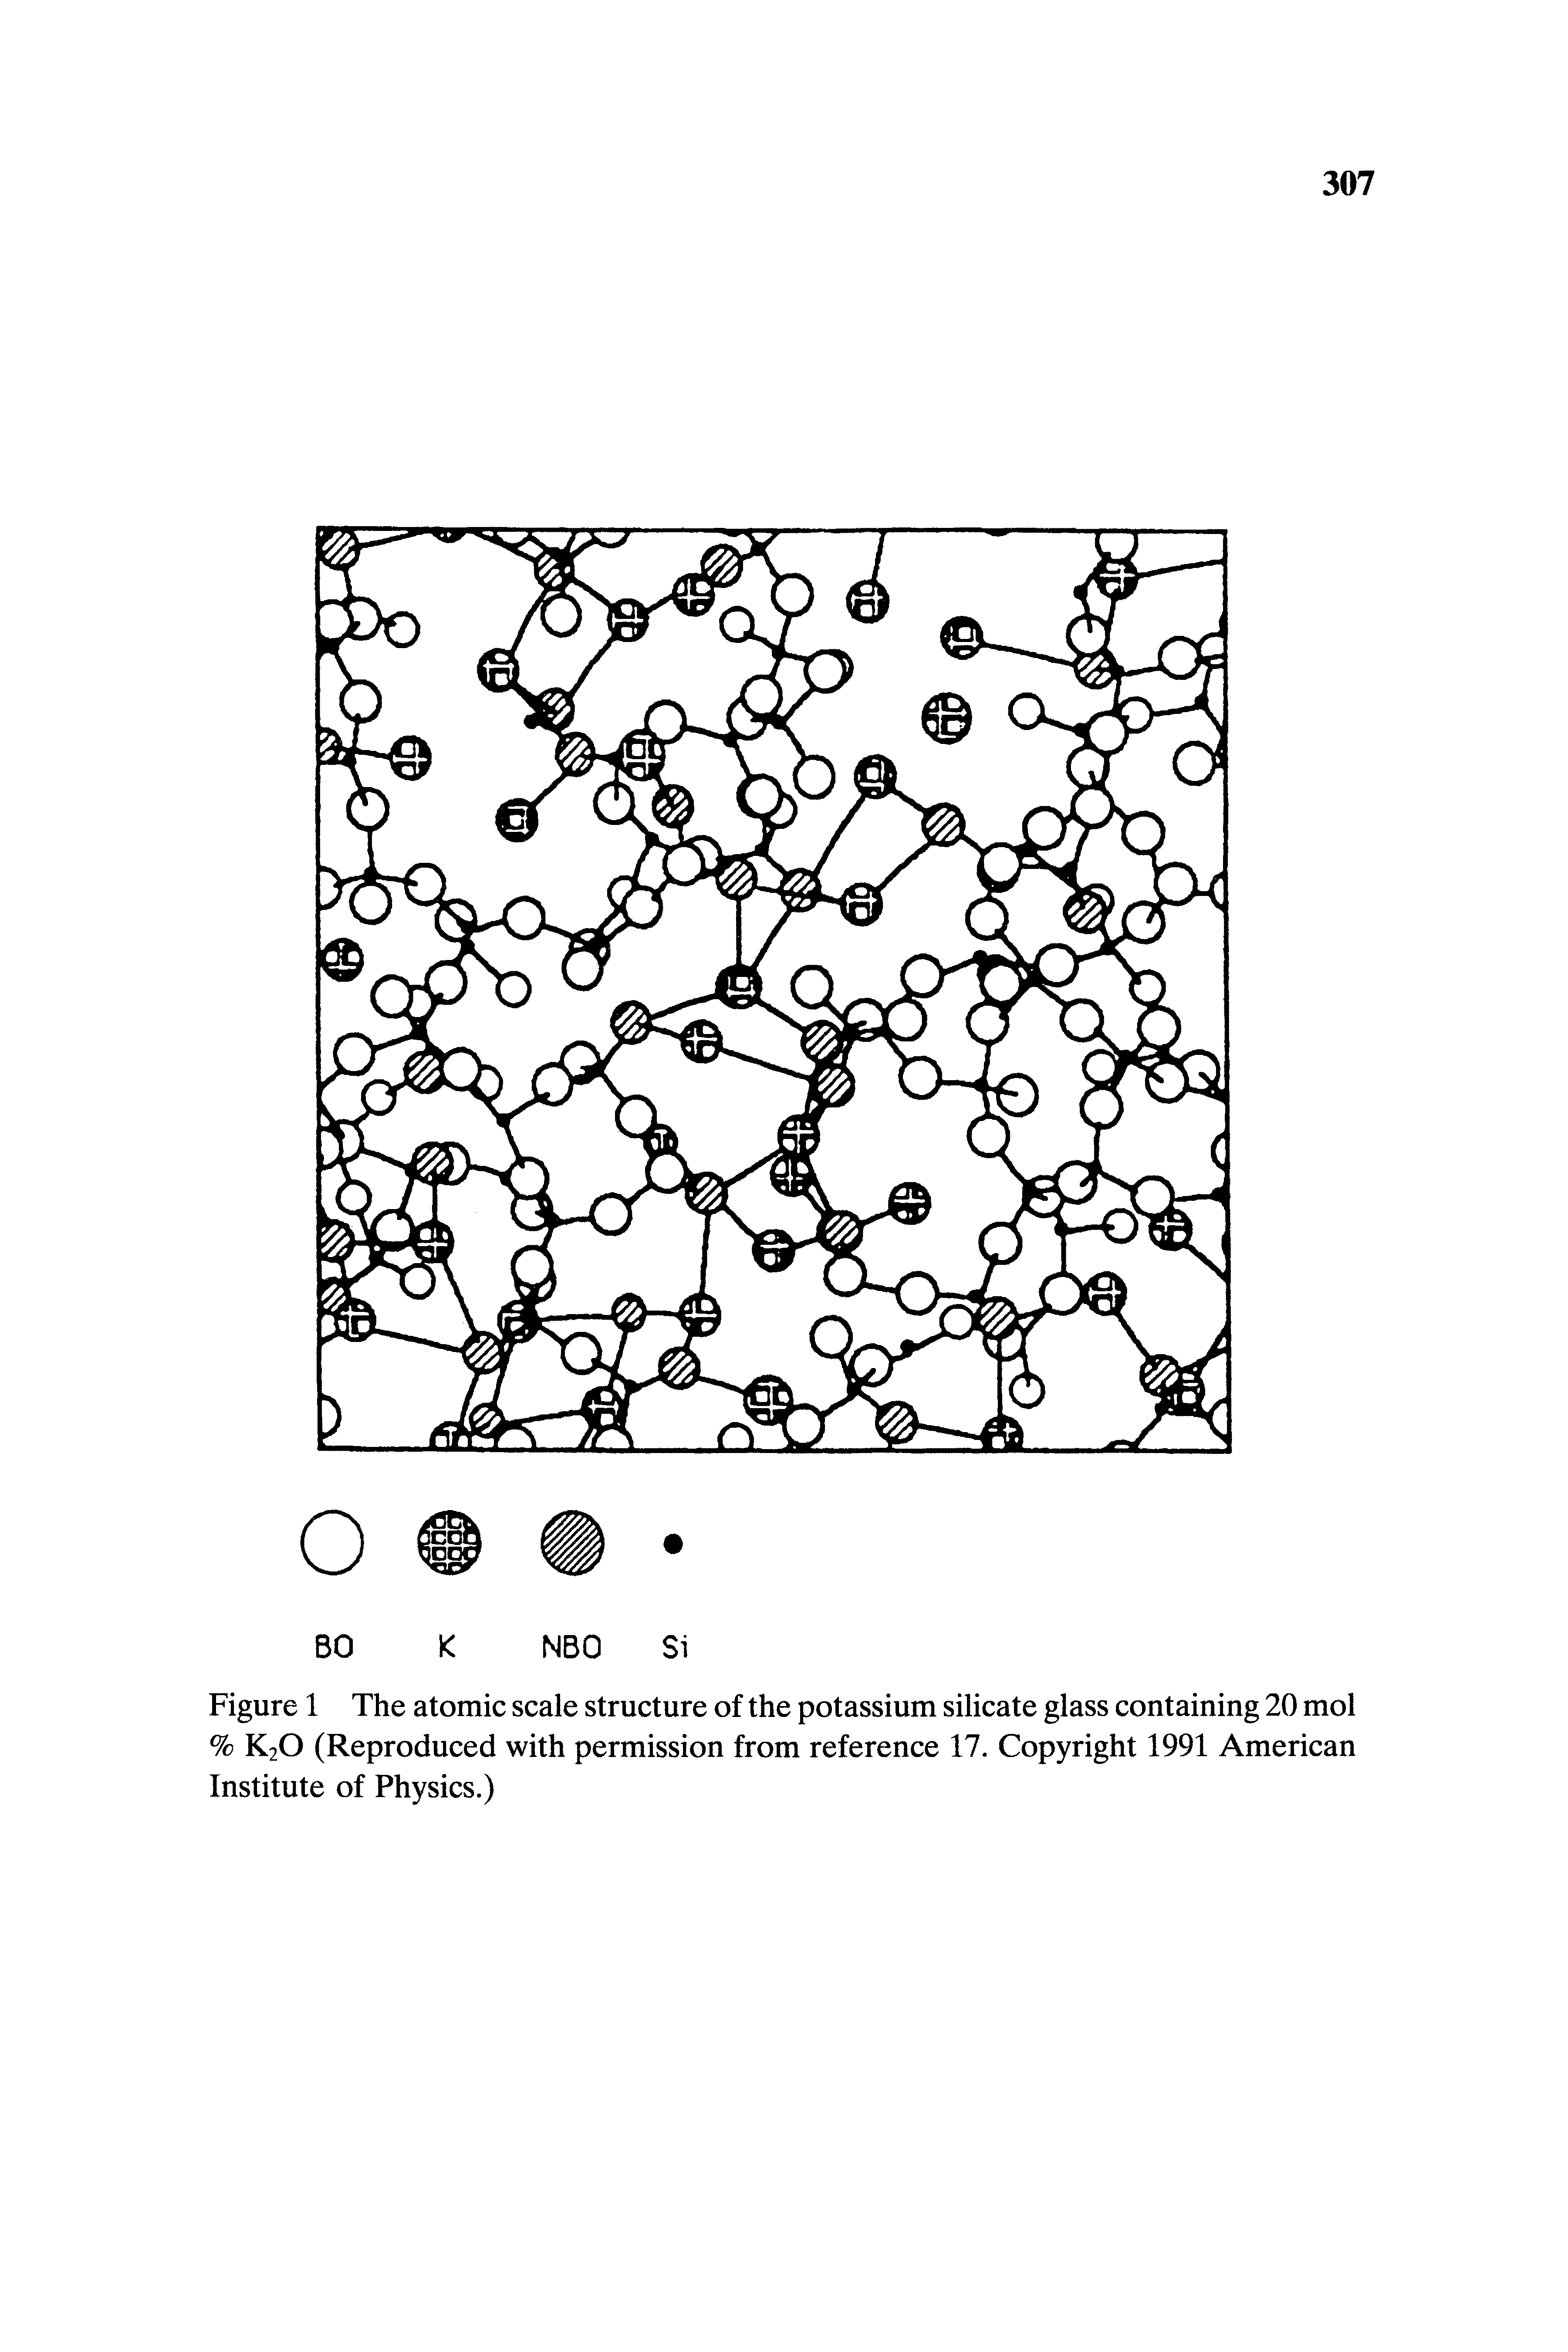 Figure 1 The atomic scale structure of the potassium silicate glass containing 20 mol % K20 (Reproduced with permission from reference 17. Copyright 1991 American Institute of Physics.)...